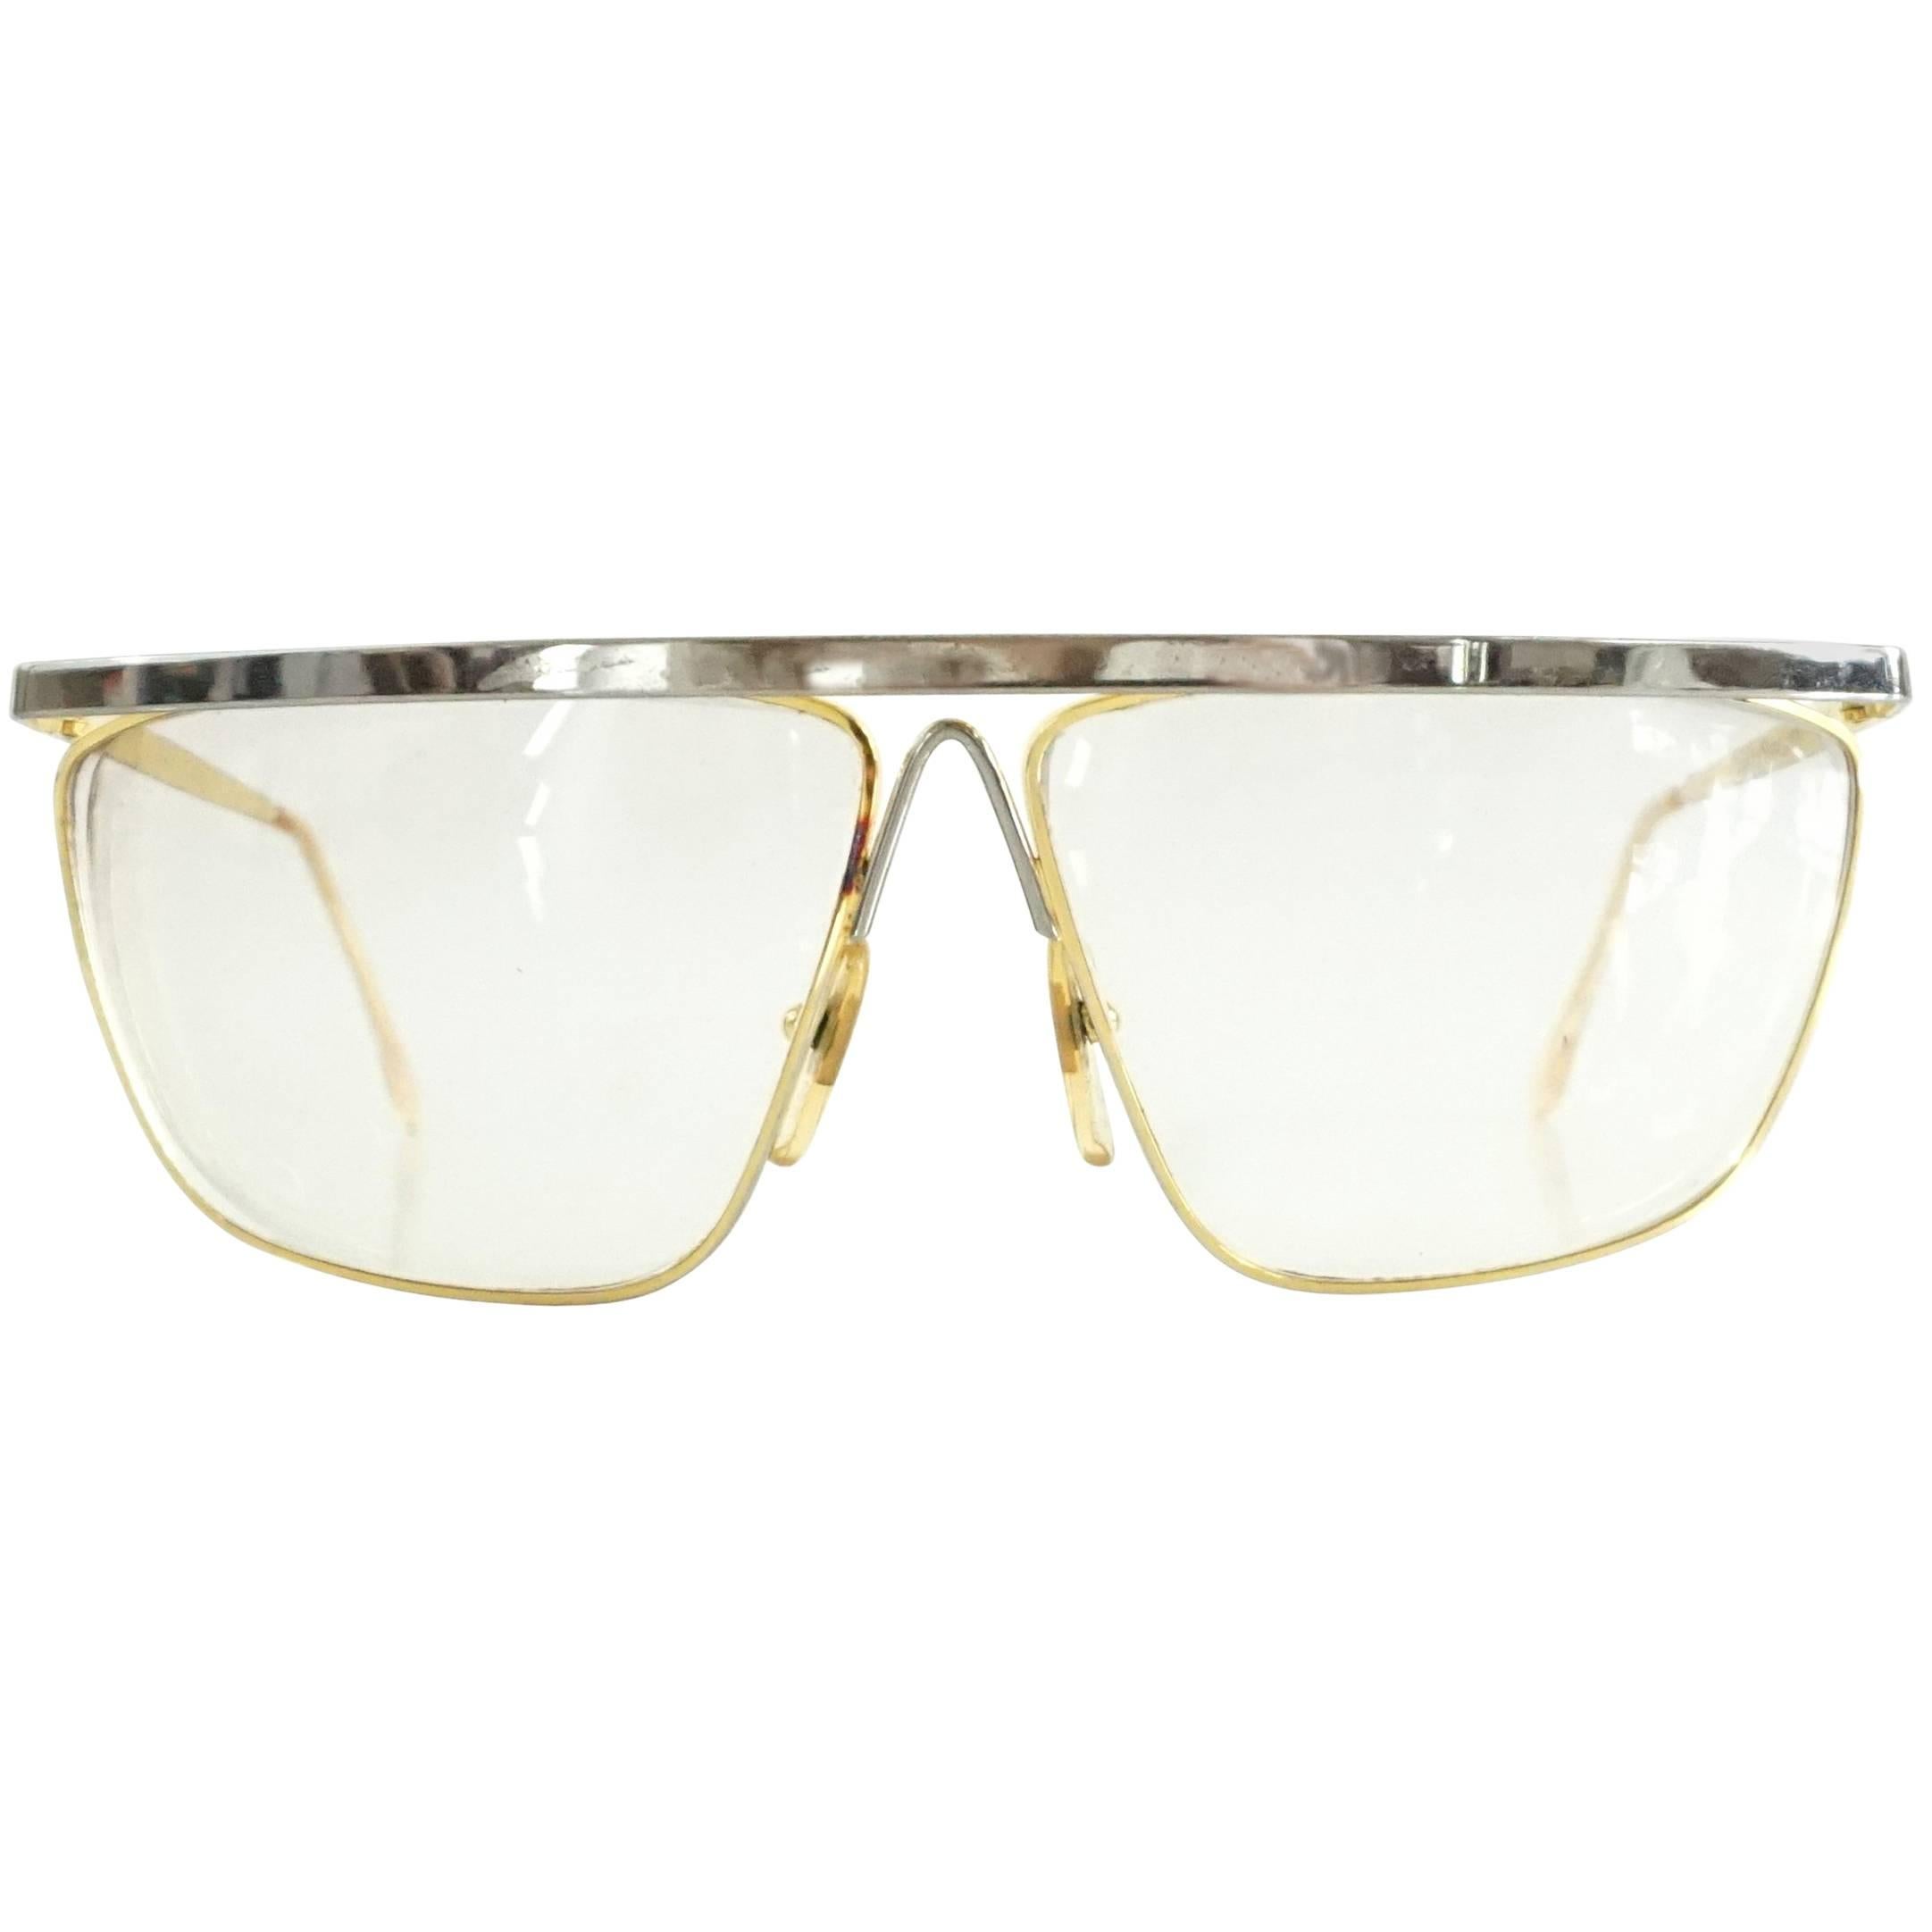 Laura Biagiotti Gold and Silver Large Glasses